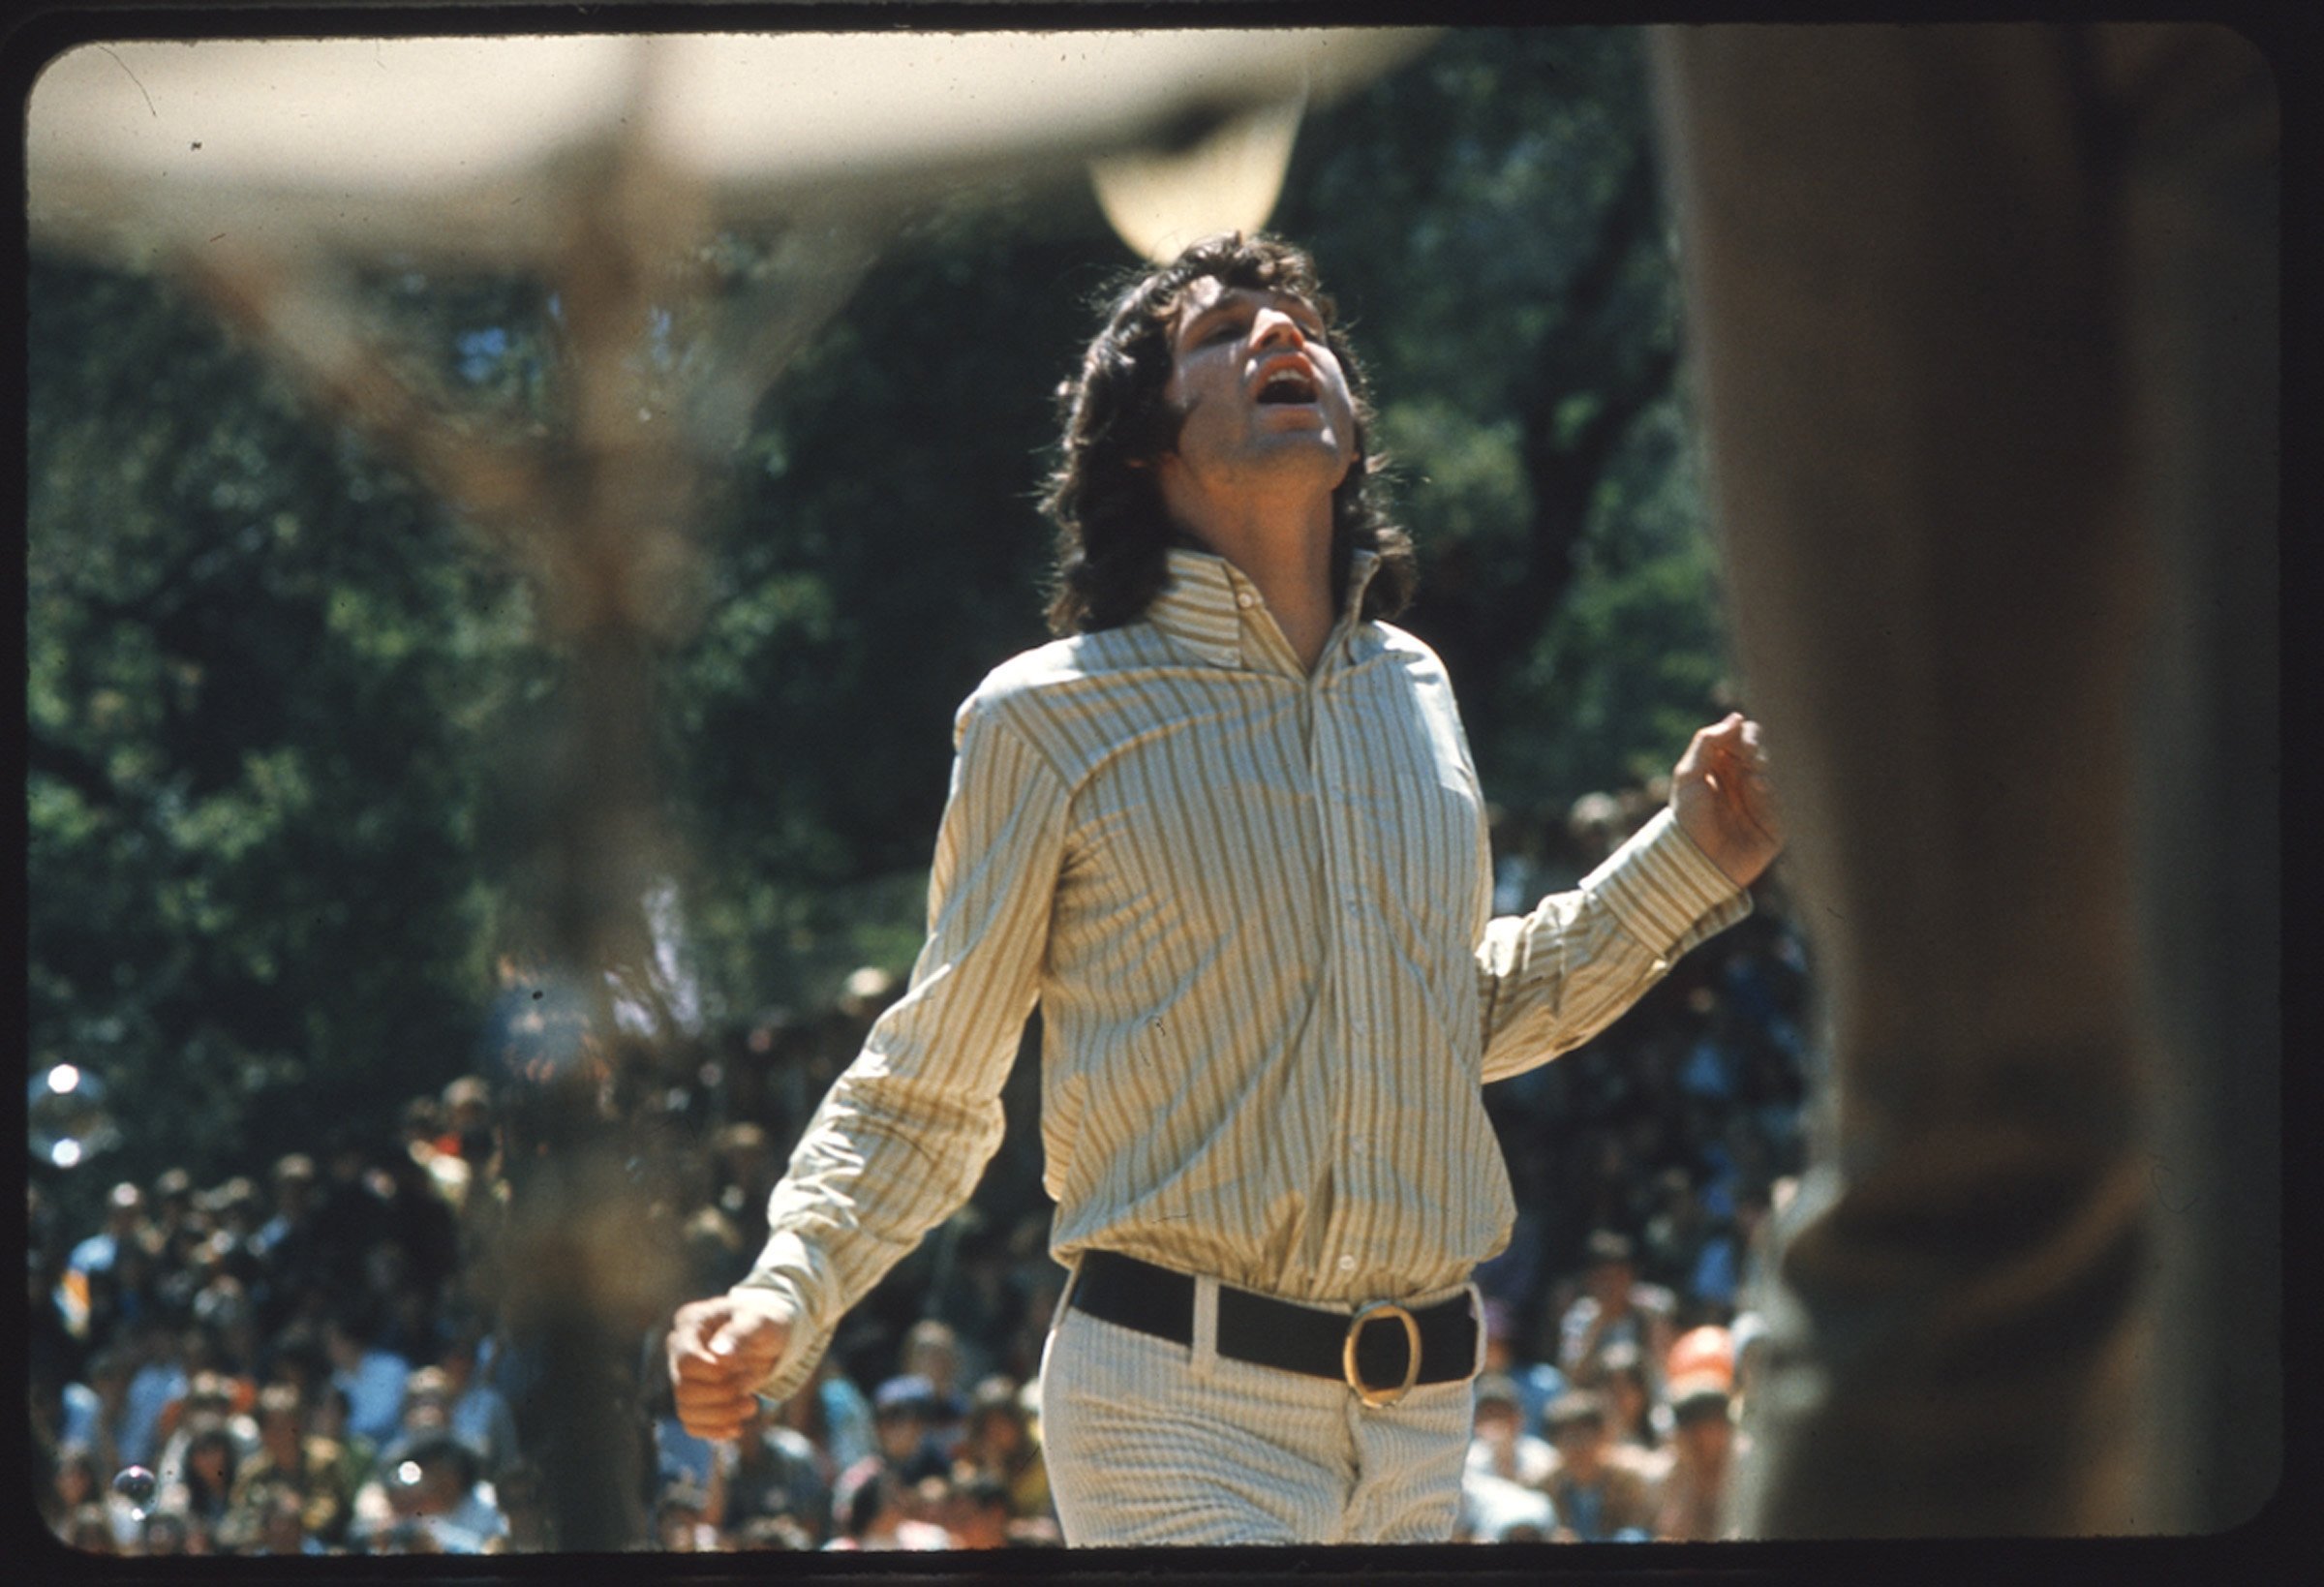 Jim Morrison dances during the Doors' set at Fantasy Fair in Marin County, California, during the Summer of Love, 1967. | Source: Getty Images